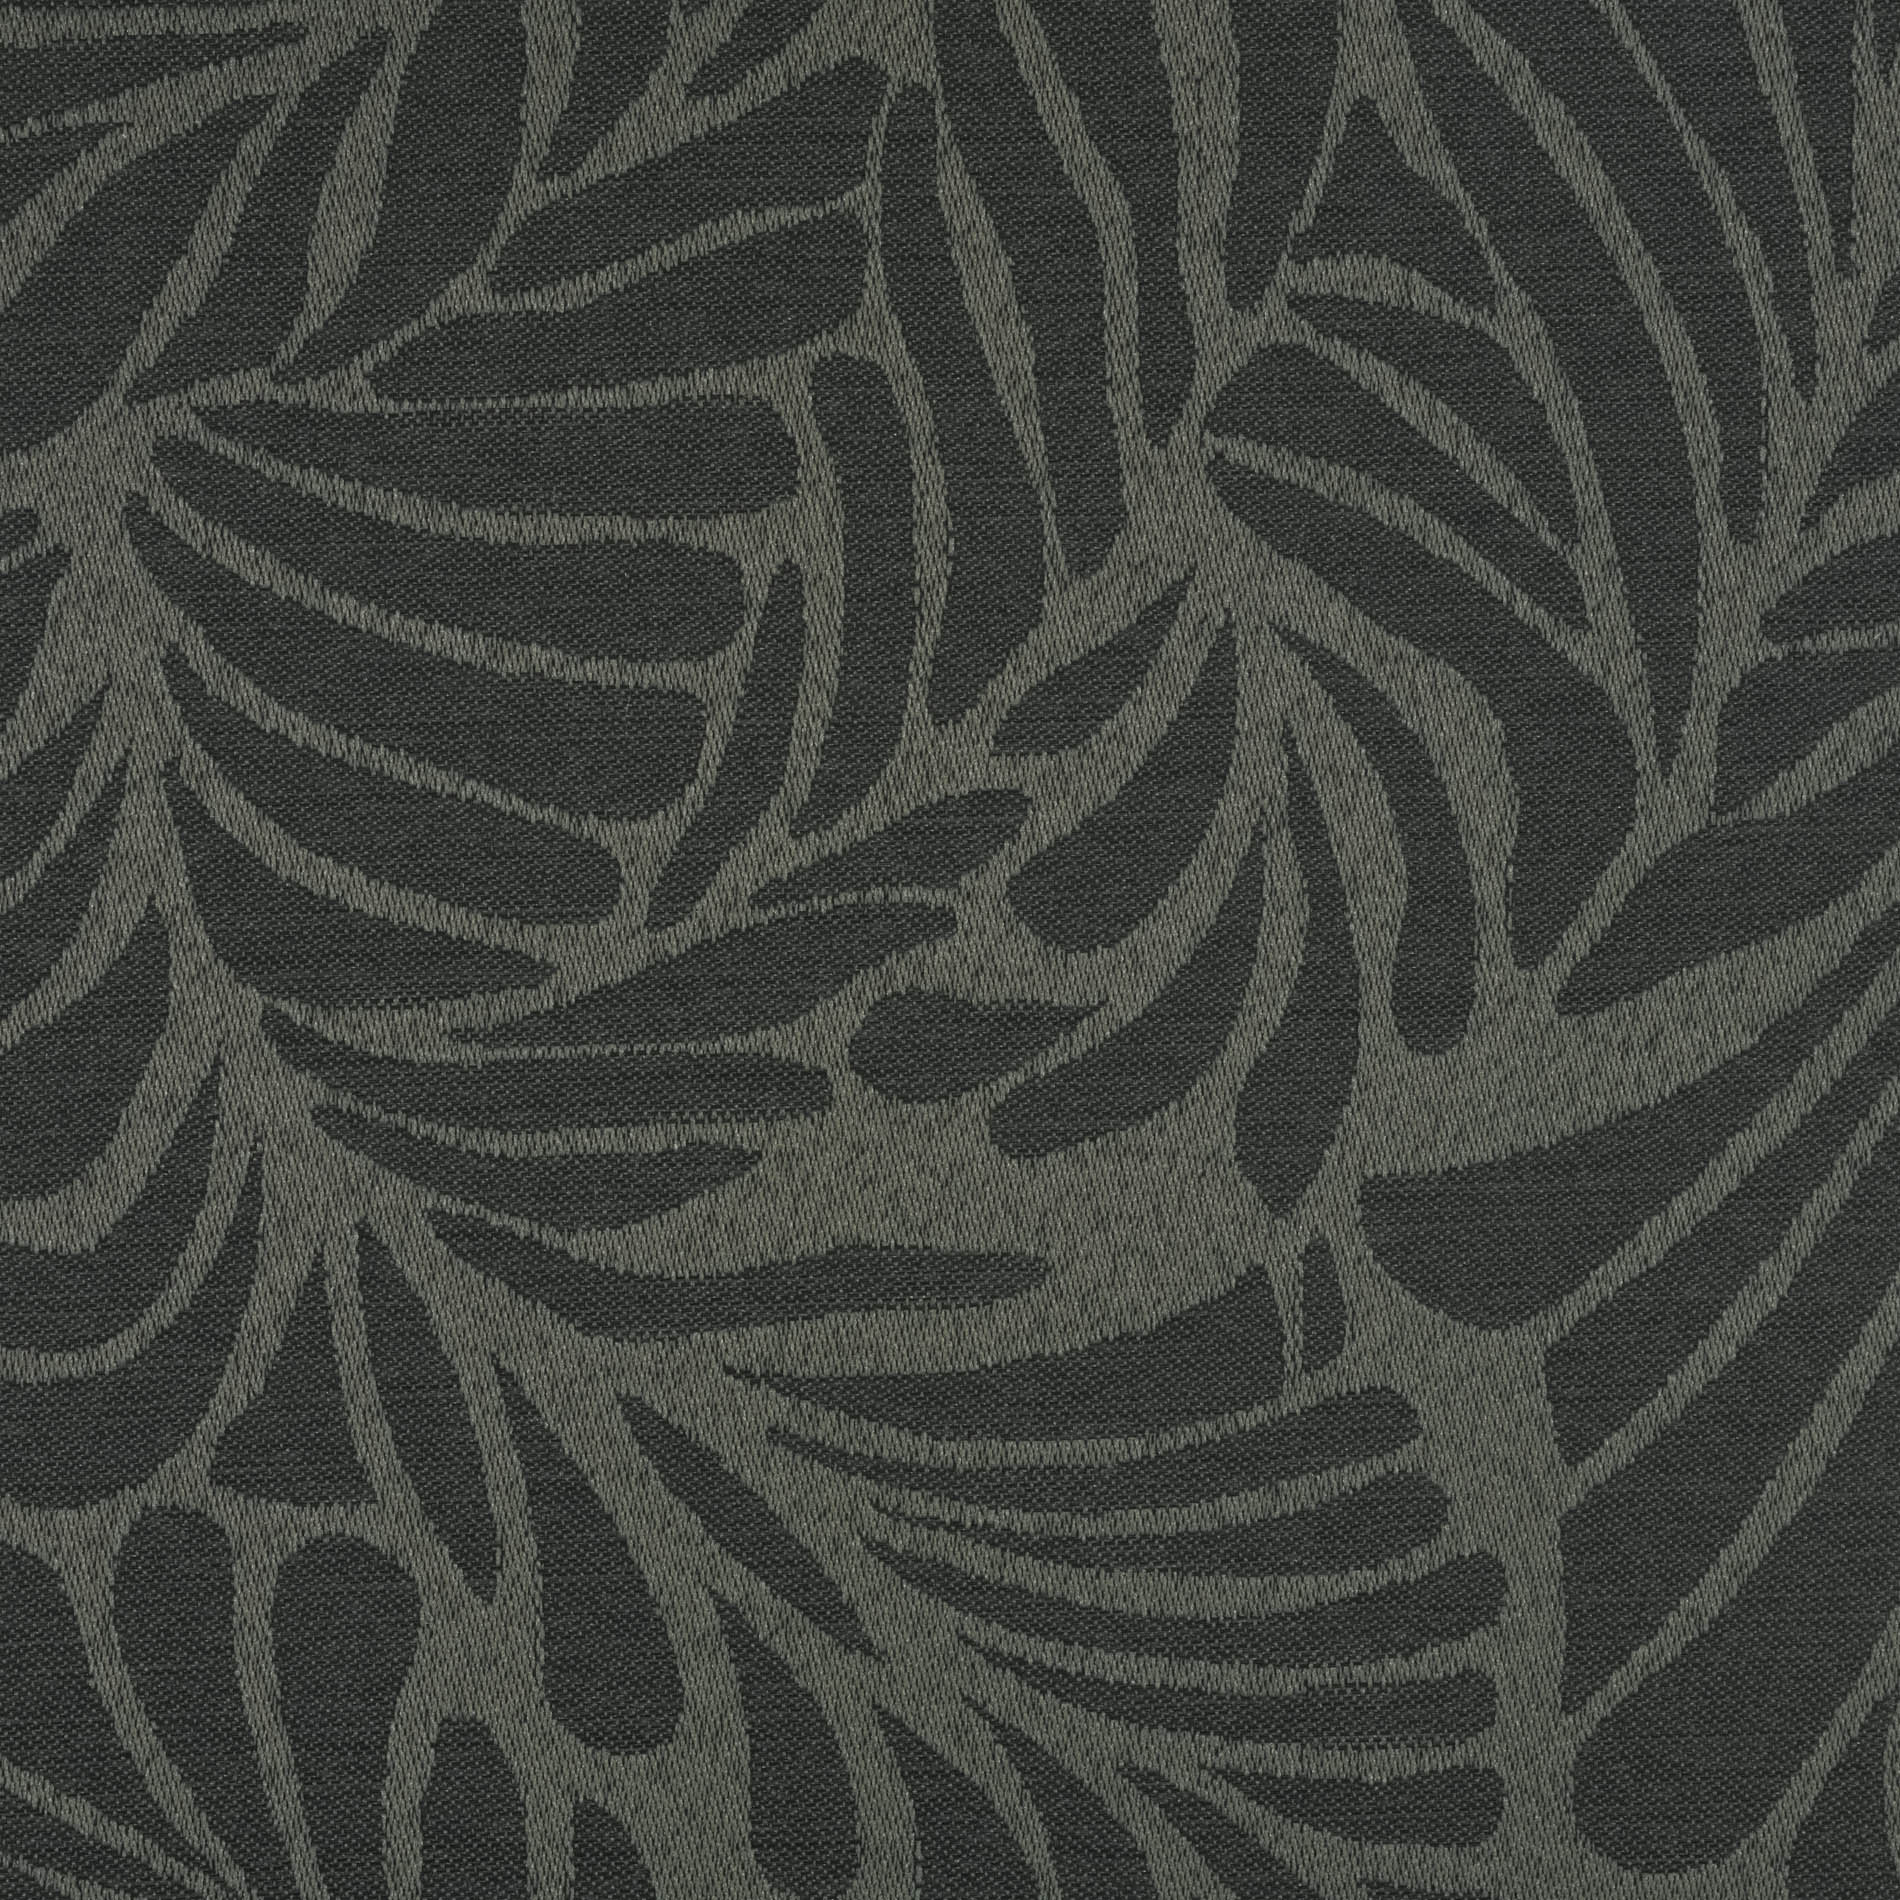 Altex - Fabric - HARLEQUIN OPAQUE - Olive Branch - 4105